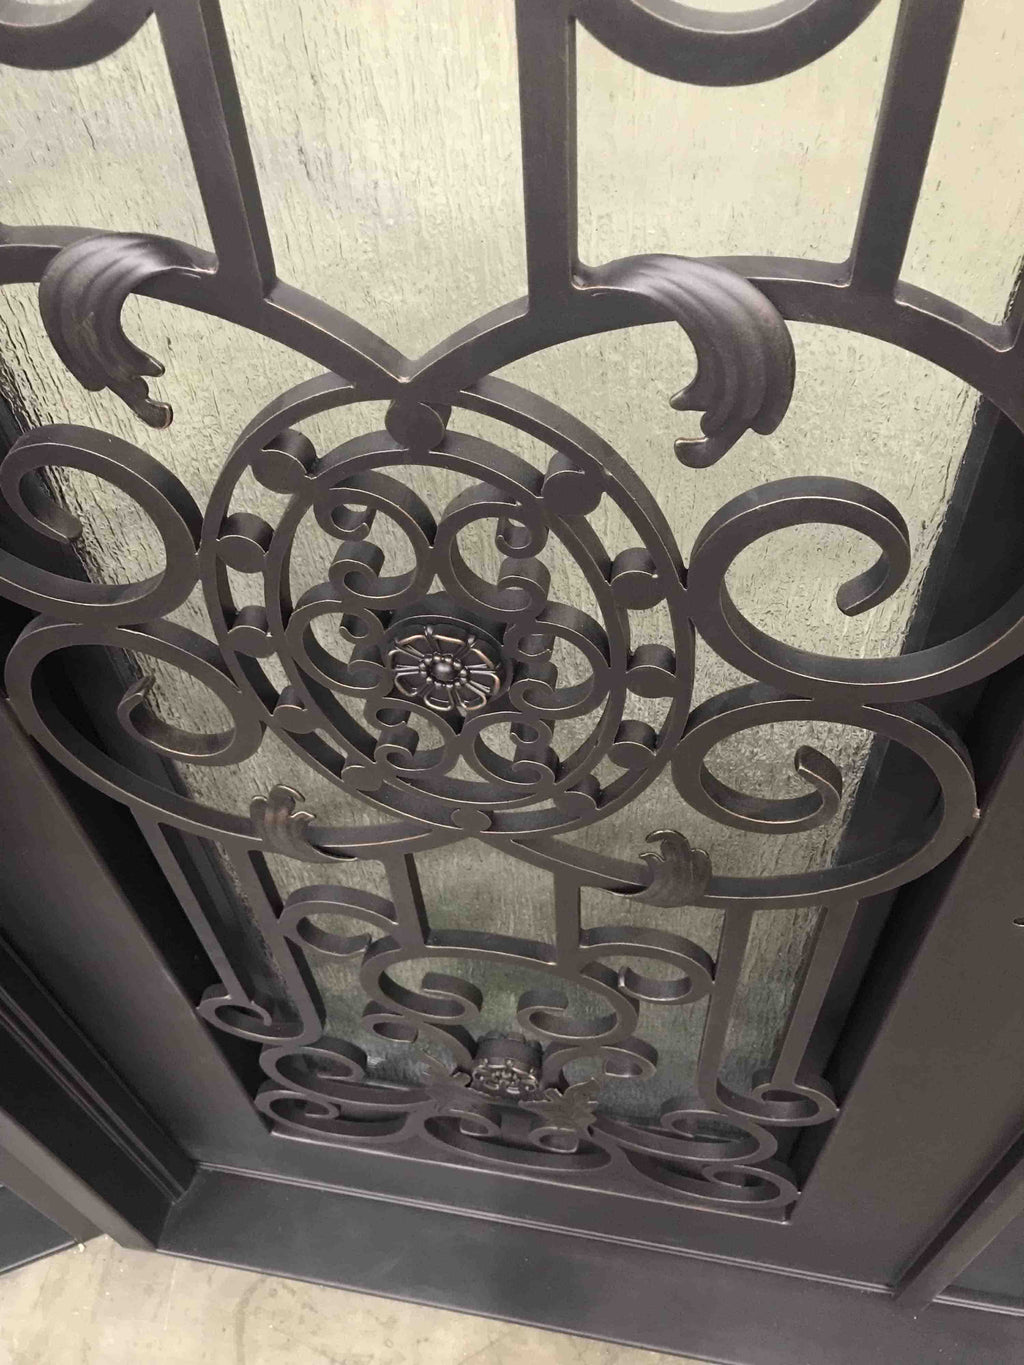 Wrought iron entry doors